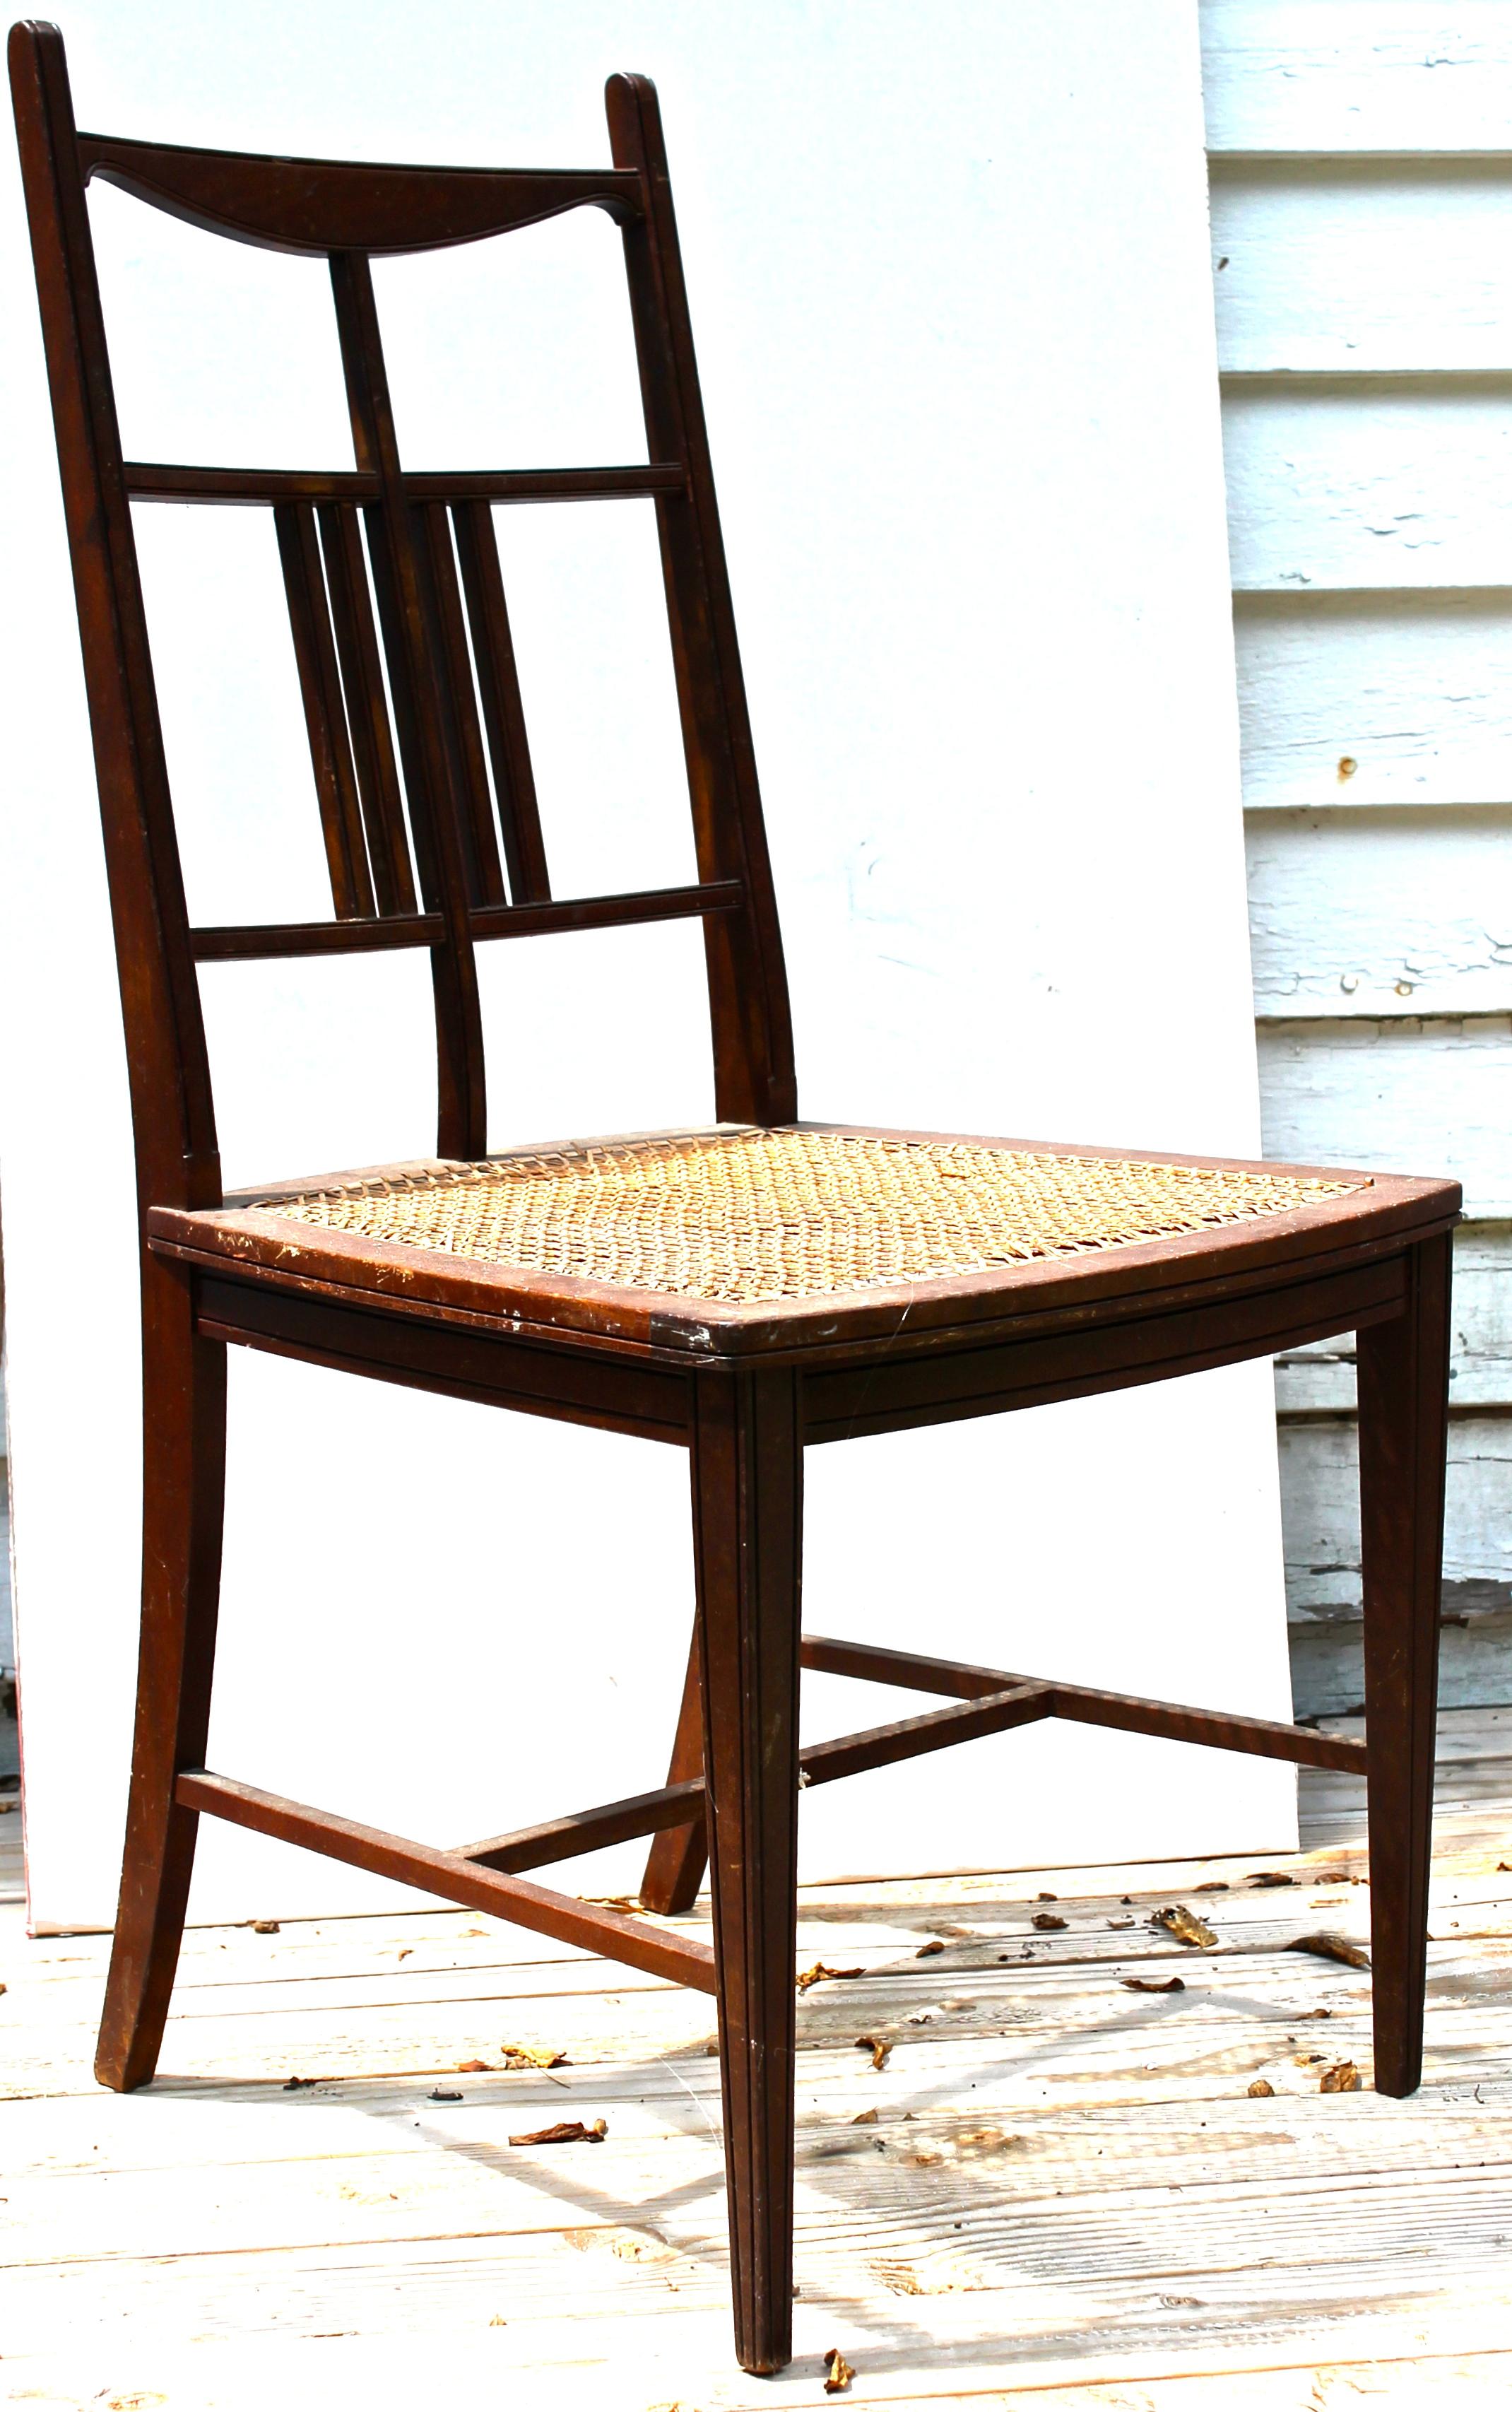 Offering a lightweight mahogany Anglo-Japanese side chair with many Godwin characteristics, and probably executed by William Watt circa 1877. Hand caned seat. Weighs less than 8 lbs.